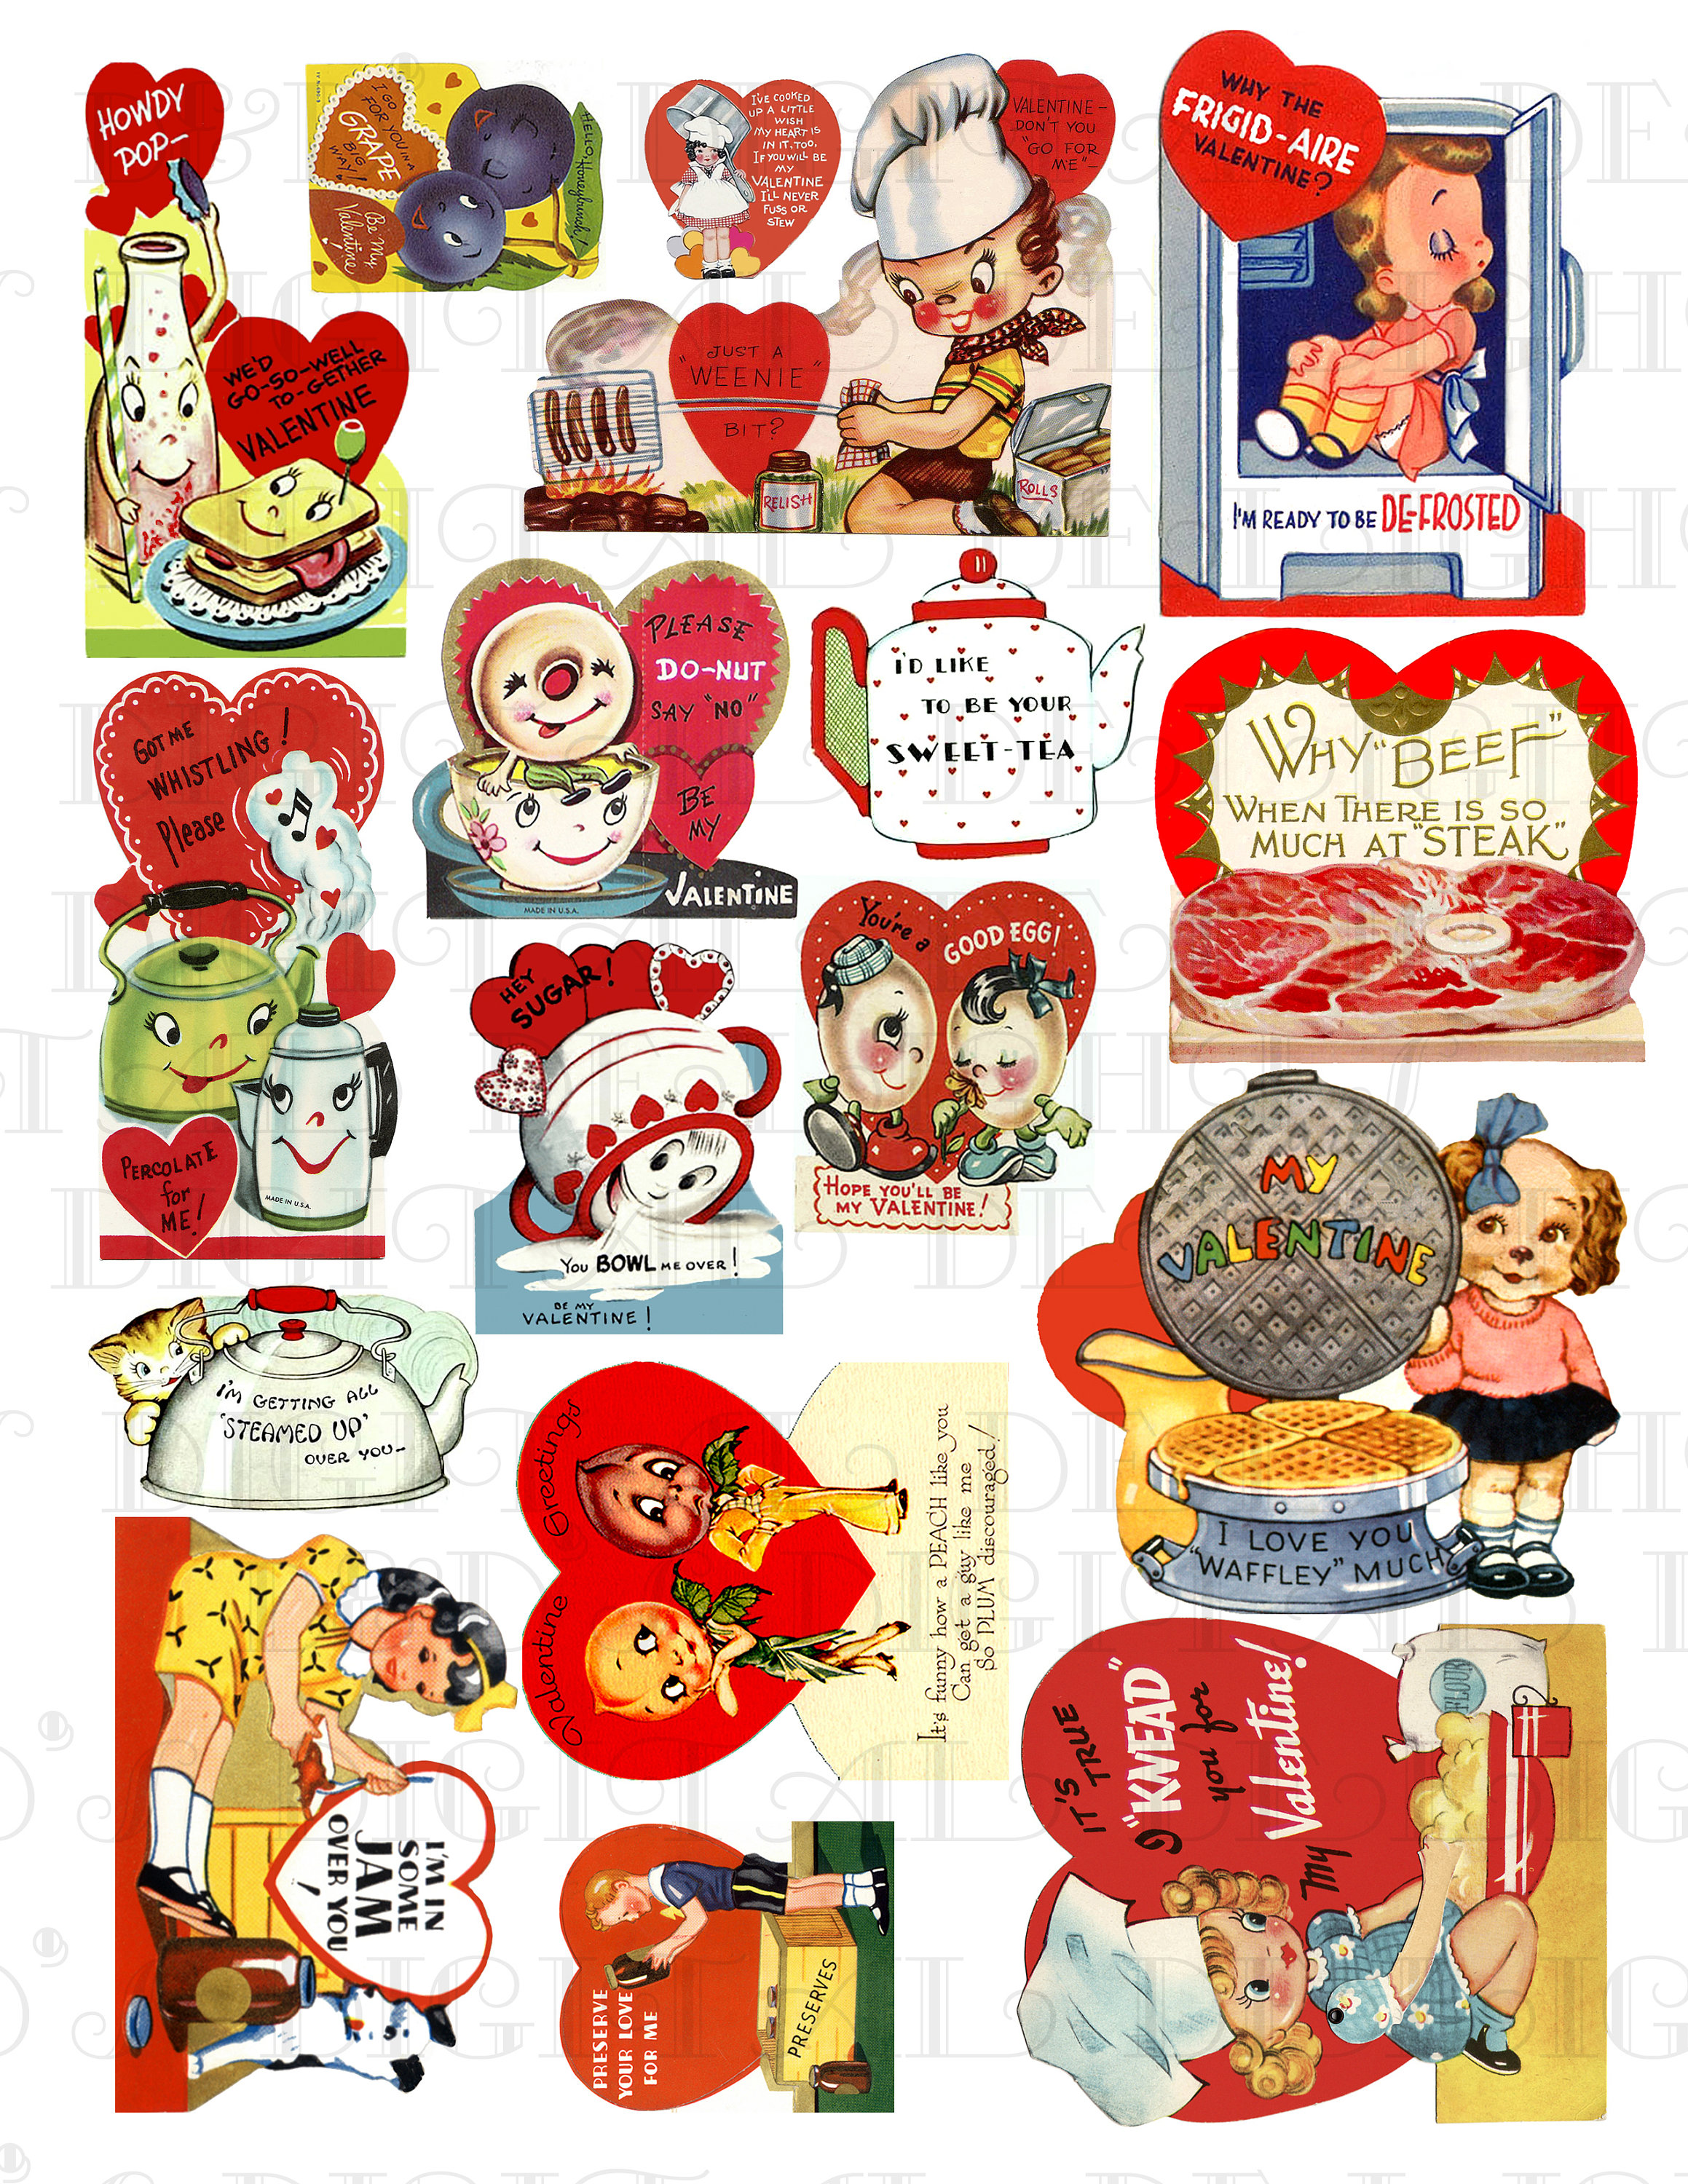  1950's VINTAGE VALENTINES DAY CARD - I'M CROWING FOR YOU :  Office Products